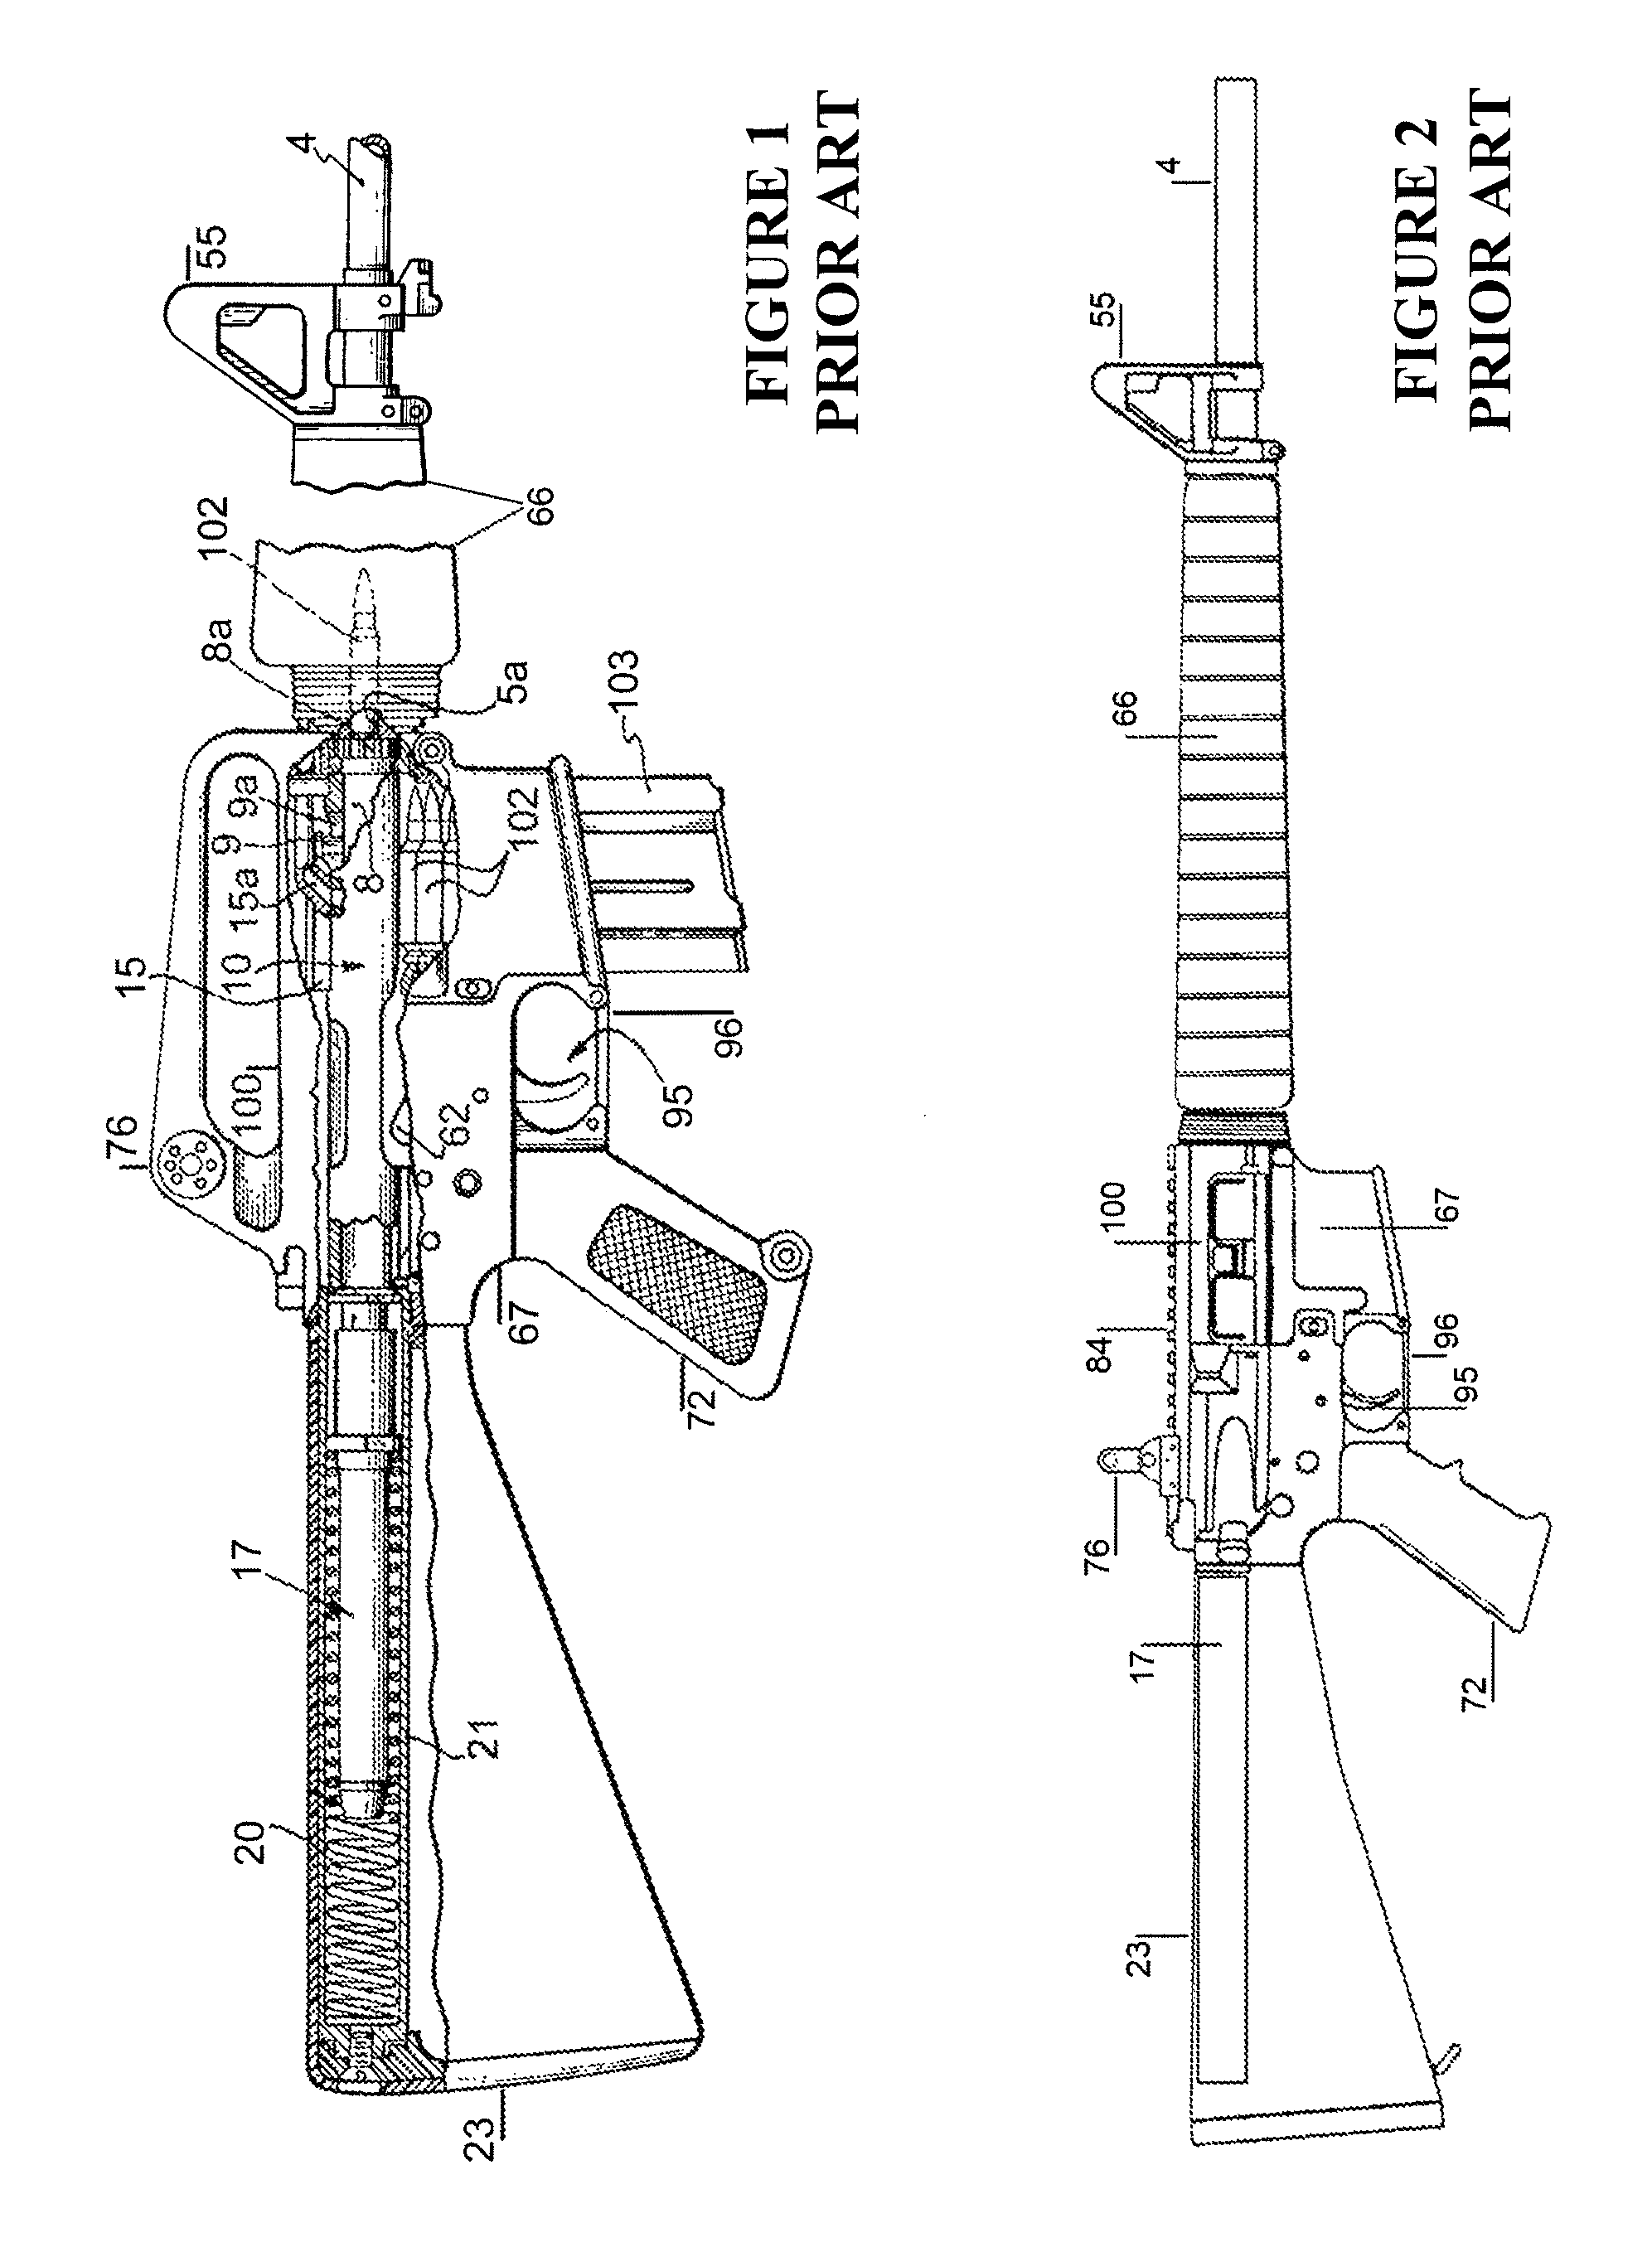 Firearm having a new gas operating system